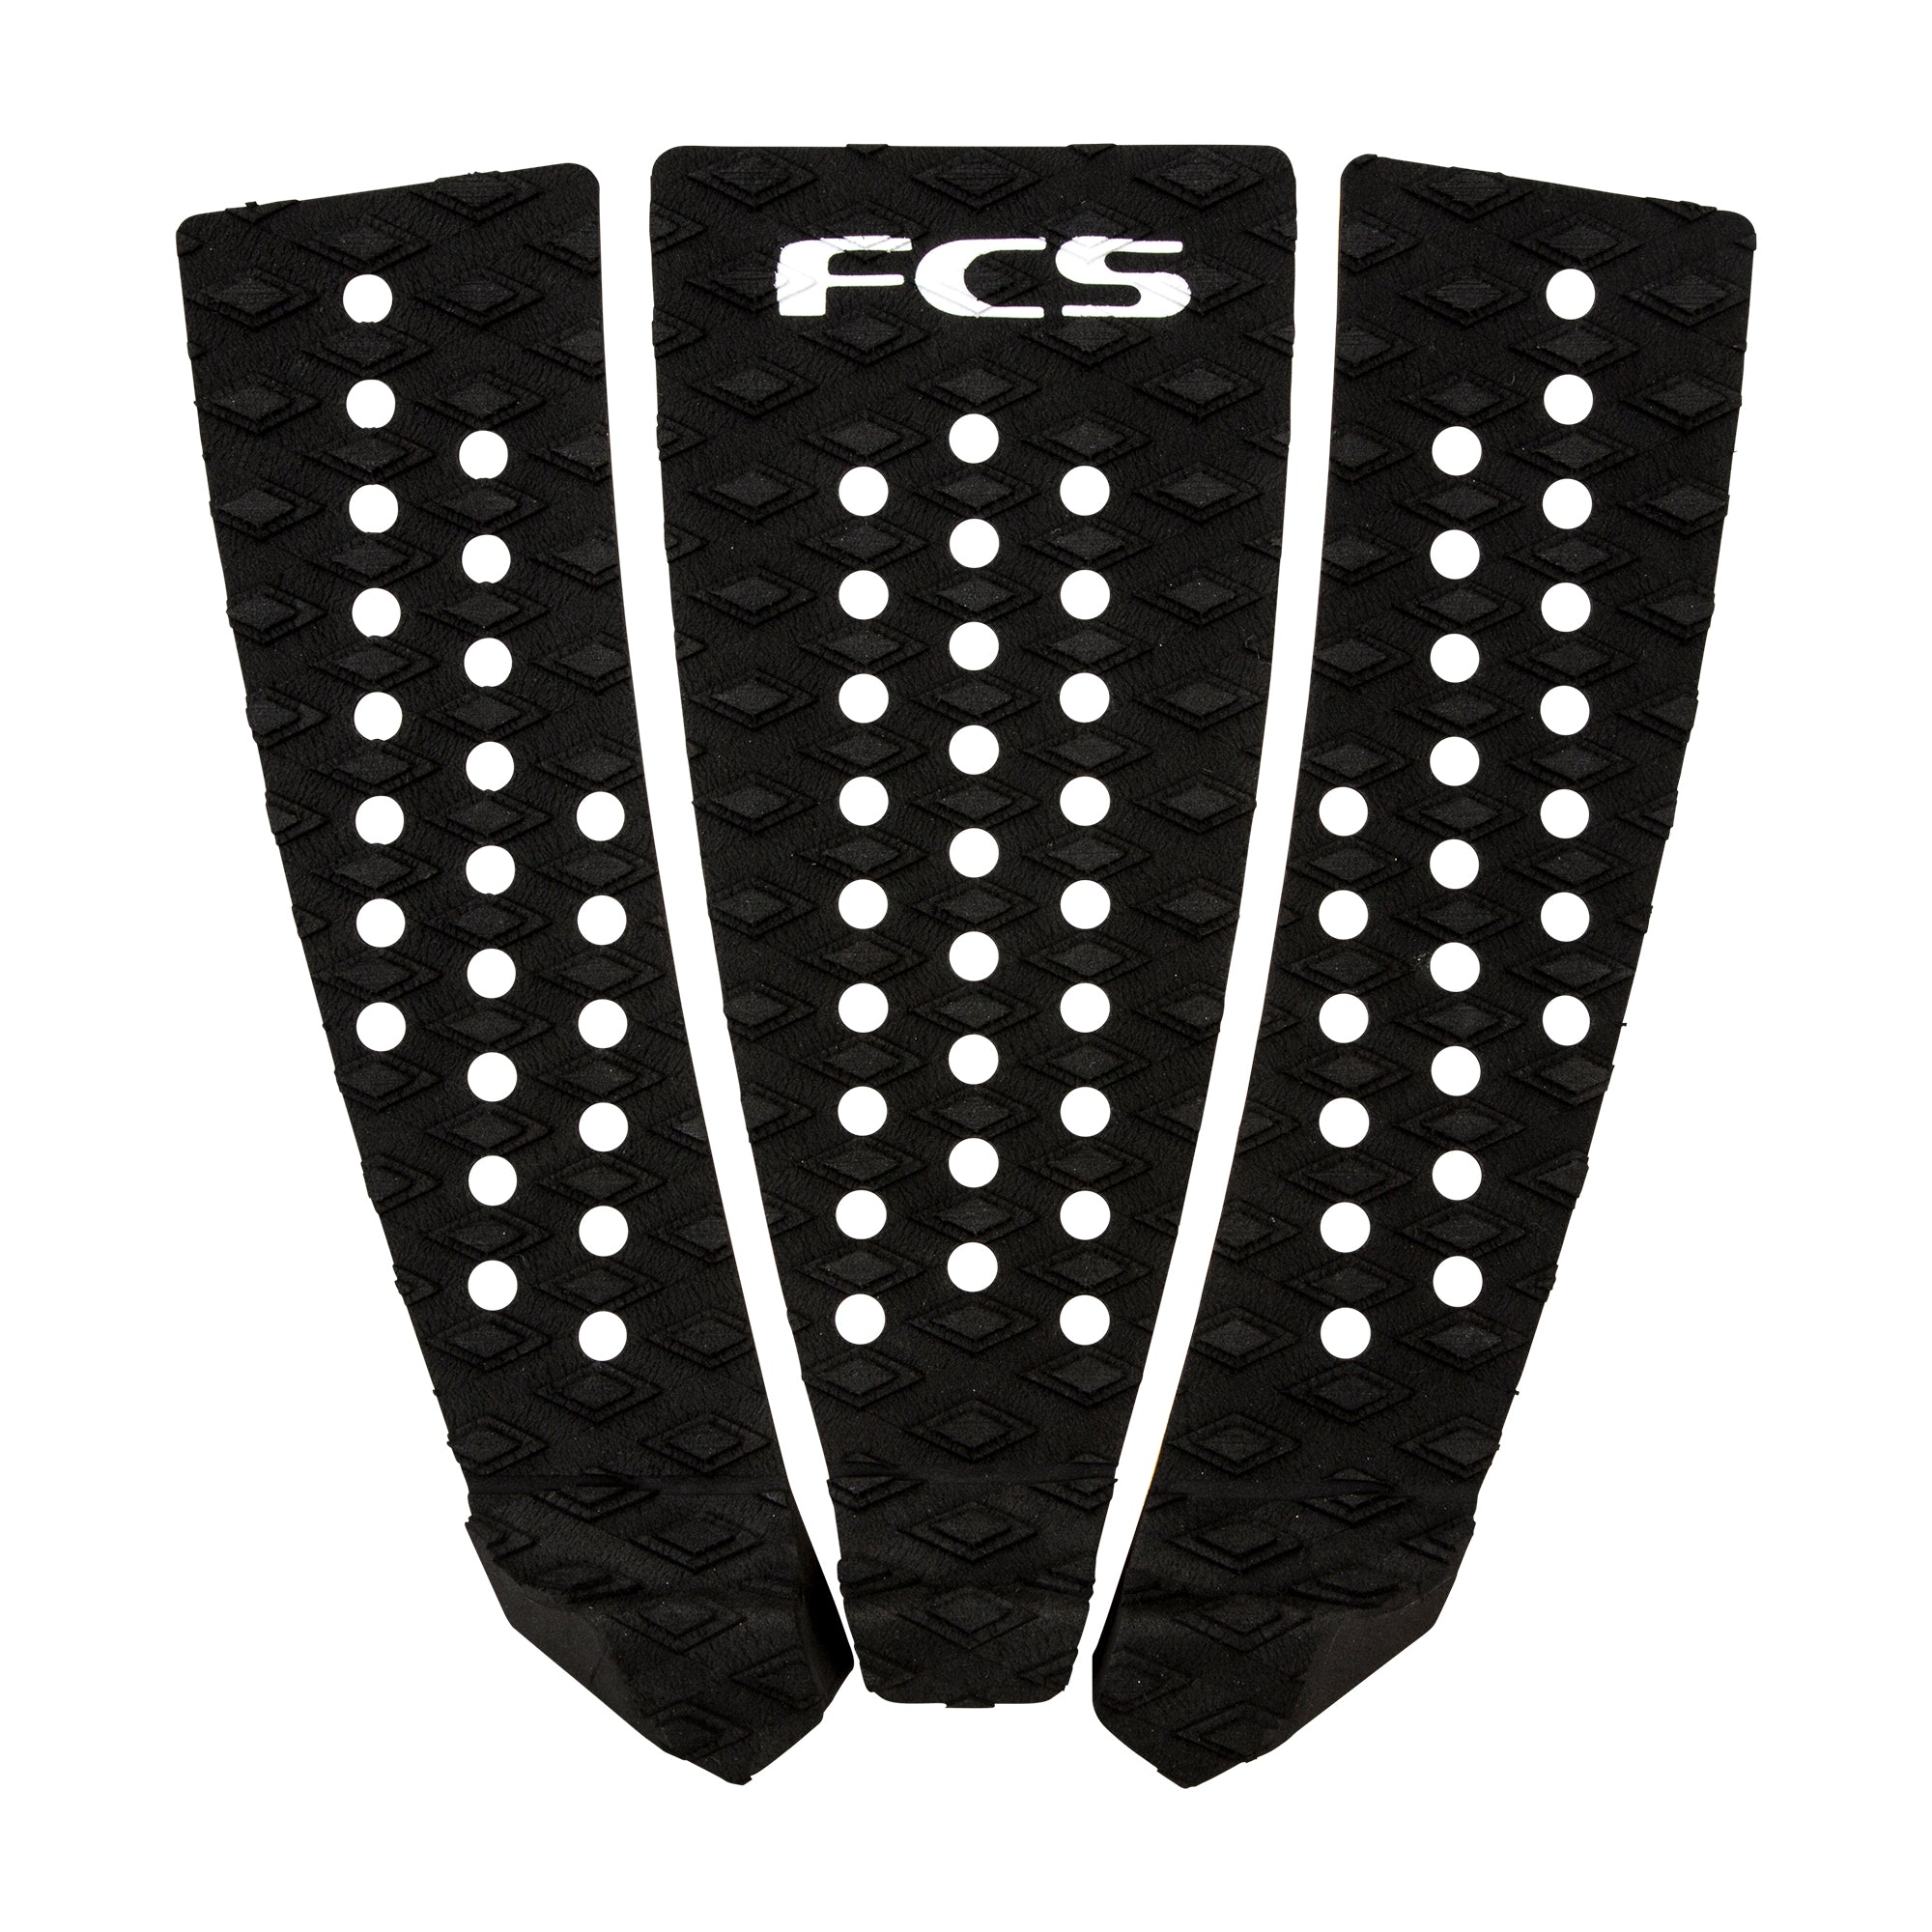 FCS C-3 Classic Traction - Jungle Surf Store - Bali - Indonesia